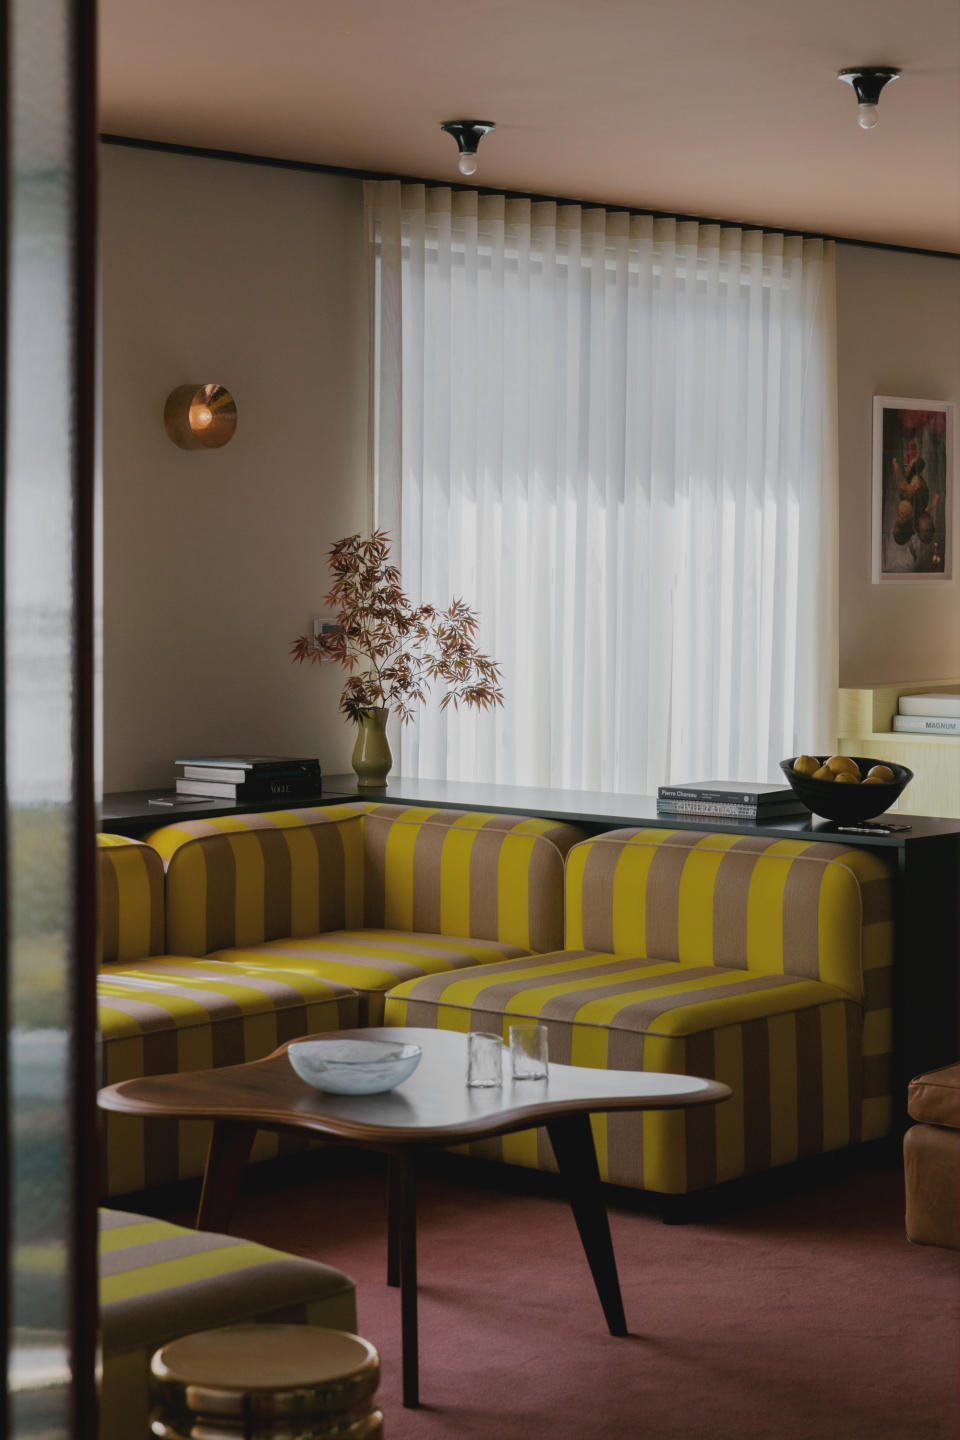 A yellow and grey striped couch